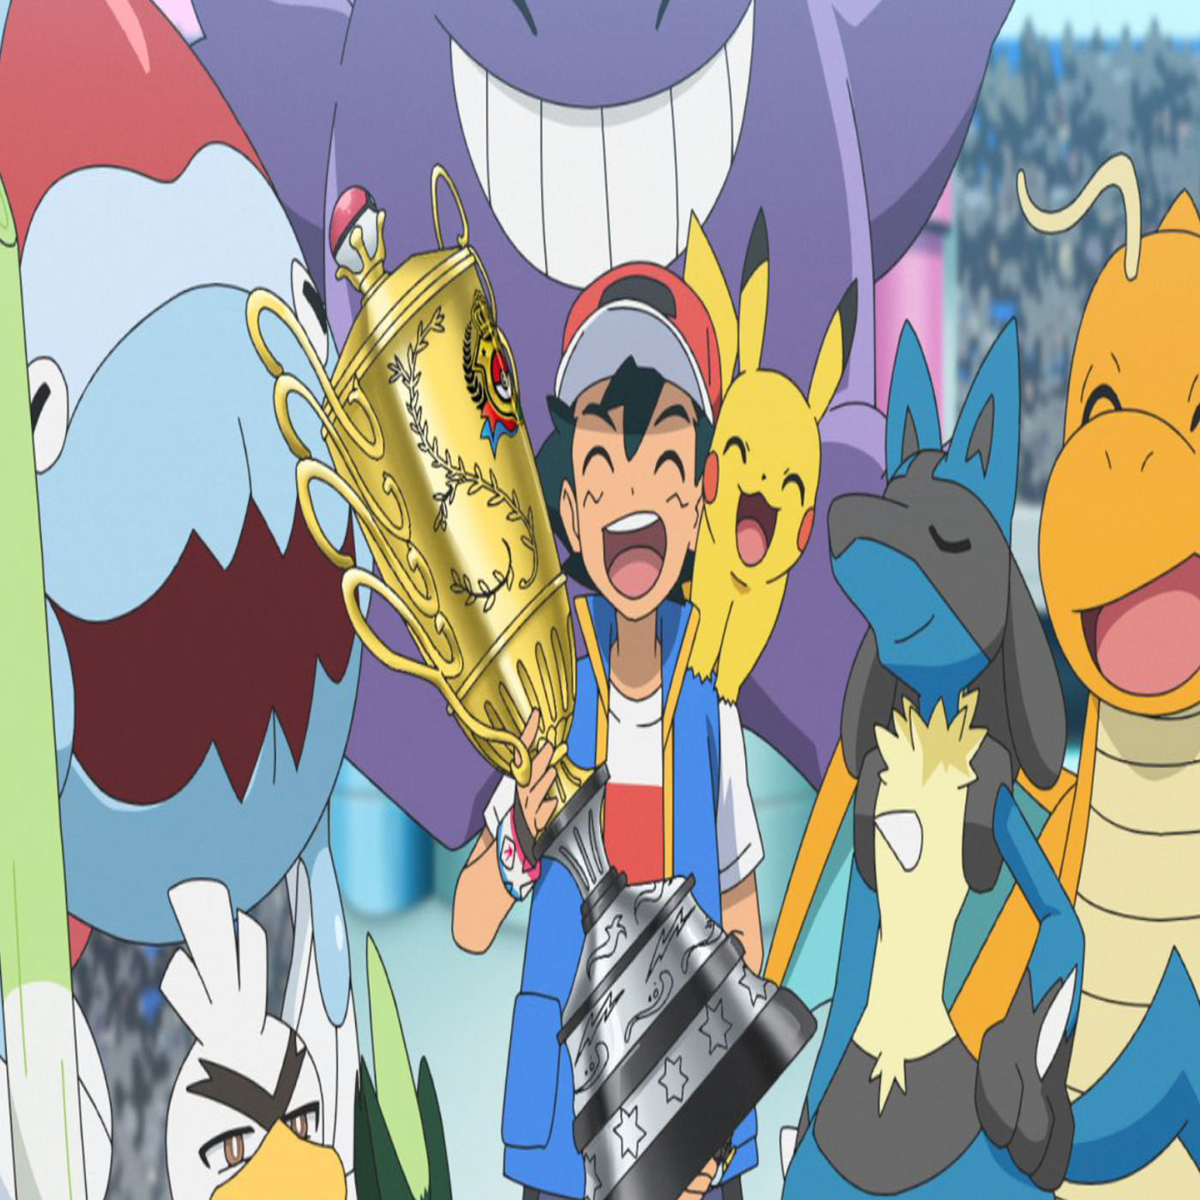 Pokemon: Every Pokemon Ash Ketchum Didn't Officially Own Or Just Had For A  Brief Time